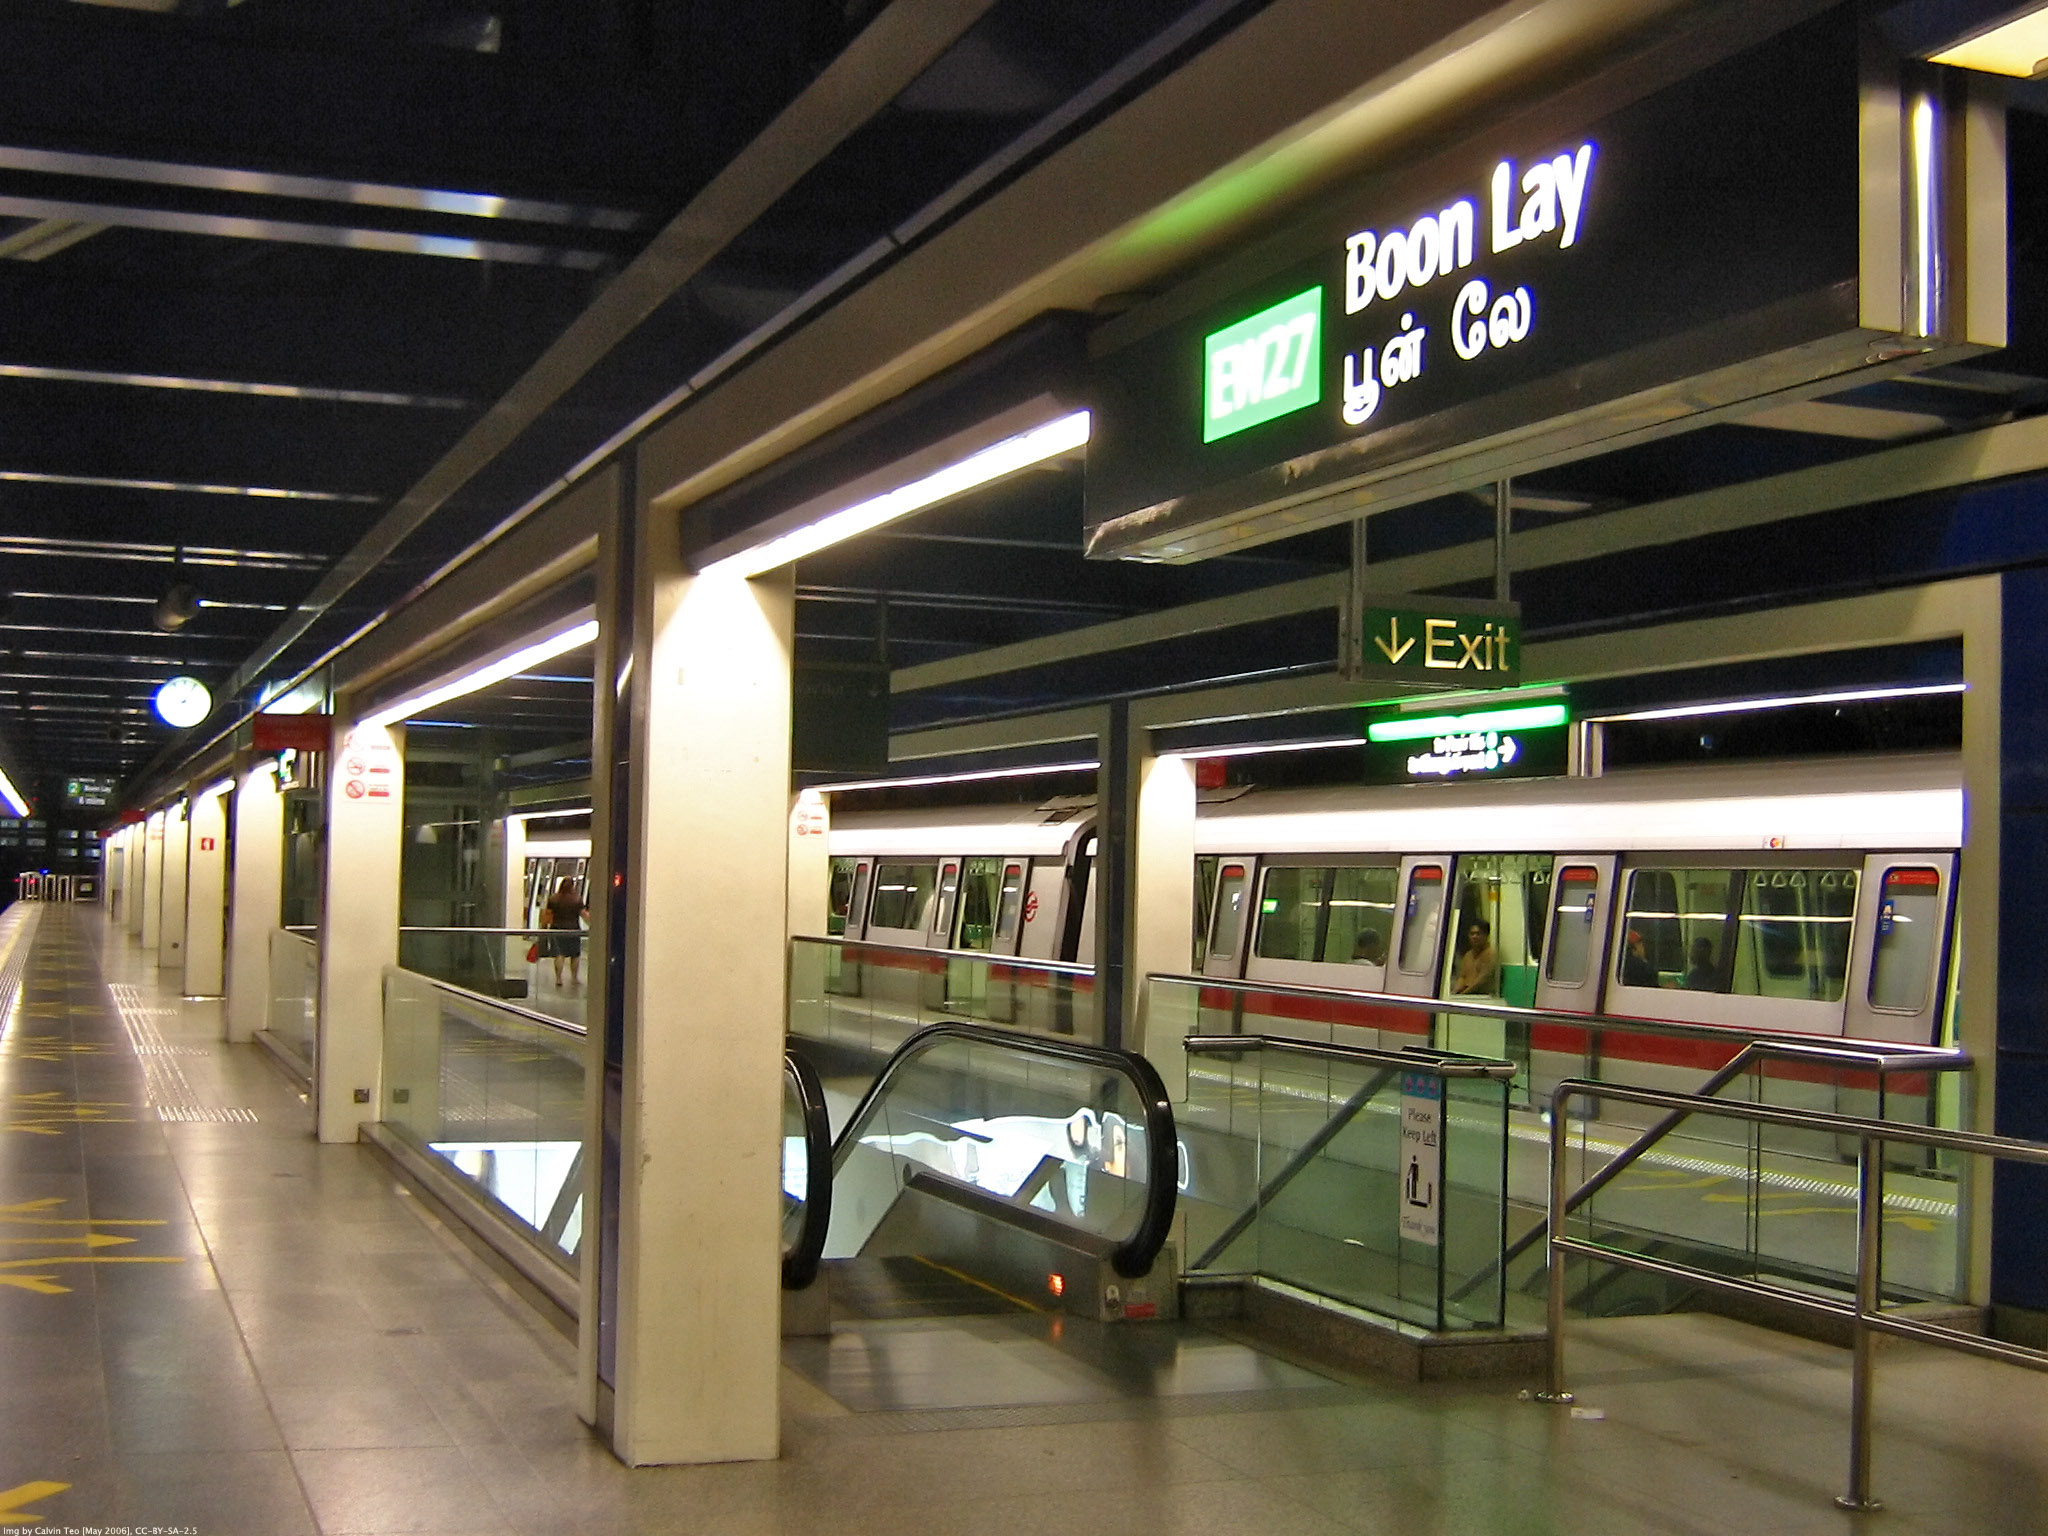 East west Green Line Singapore EW27 Boon Lay MRT Station